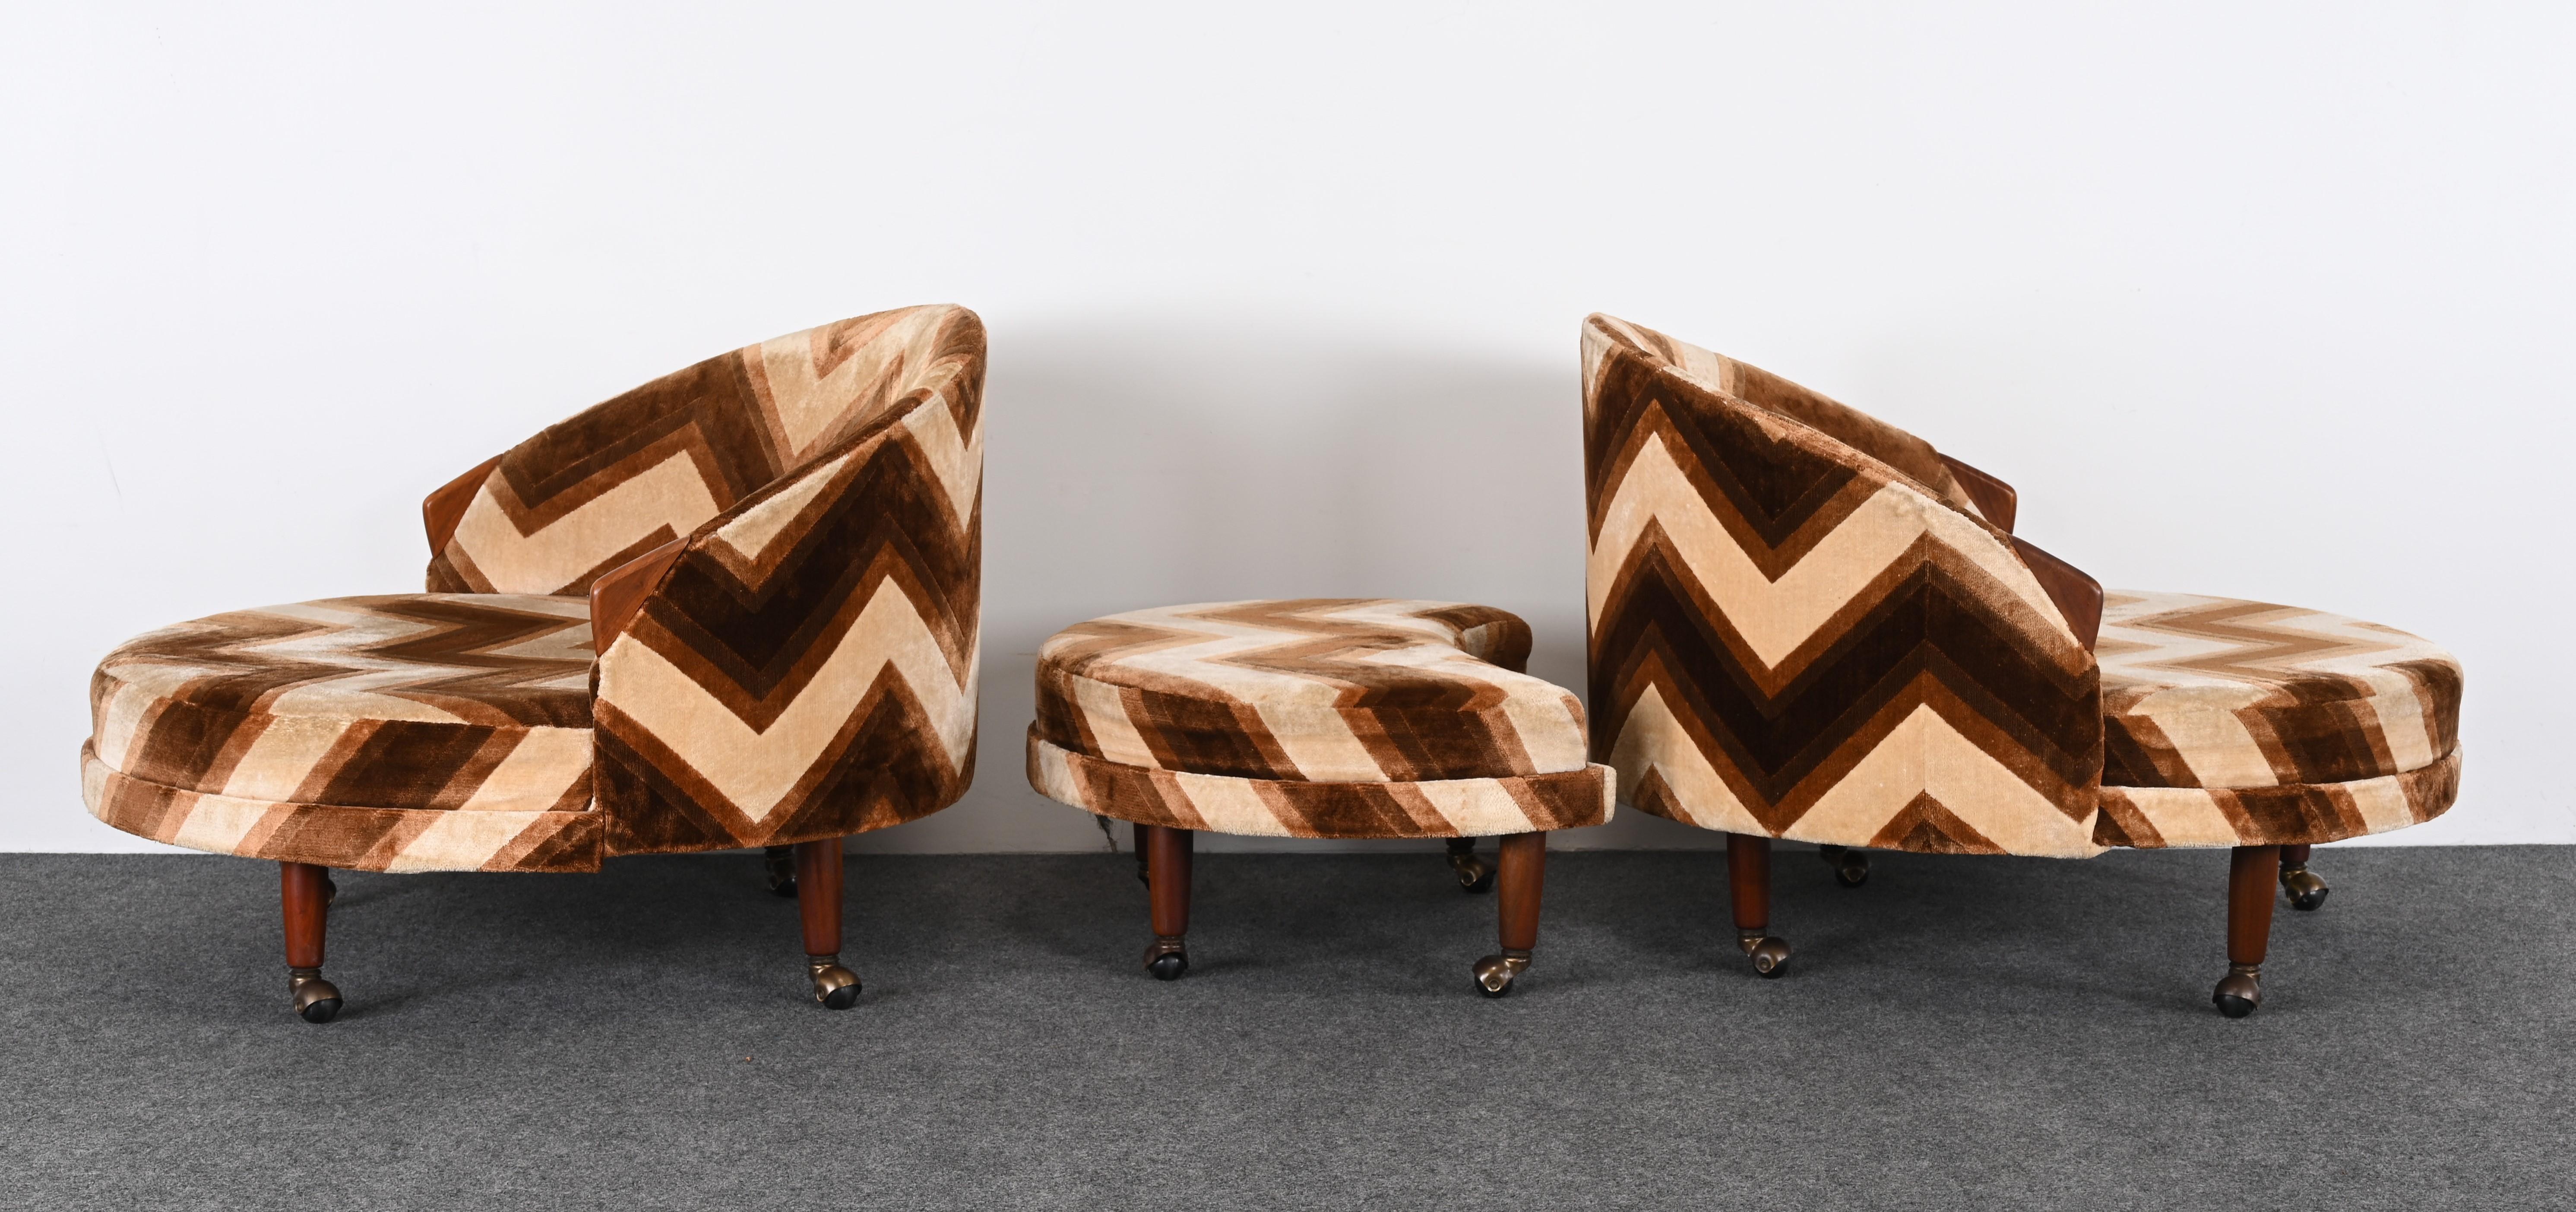 Pair of Adrian Pearsall Havana Lounge Chairs and Ottoman, 1965 For Sale 8